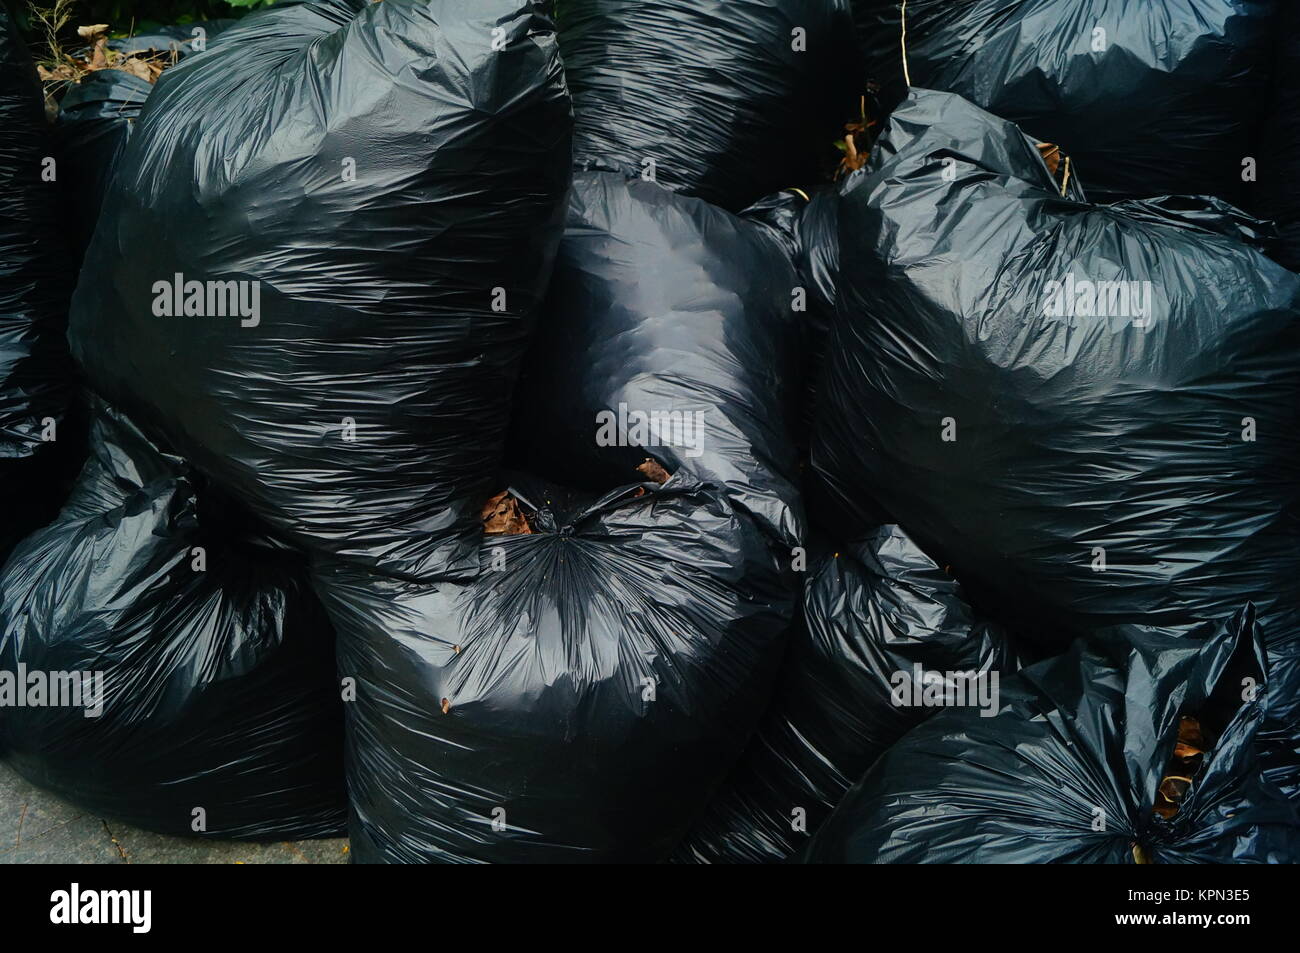 Black plastic bags filled with garbage, heaps of heaps, on the city ...